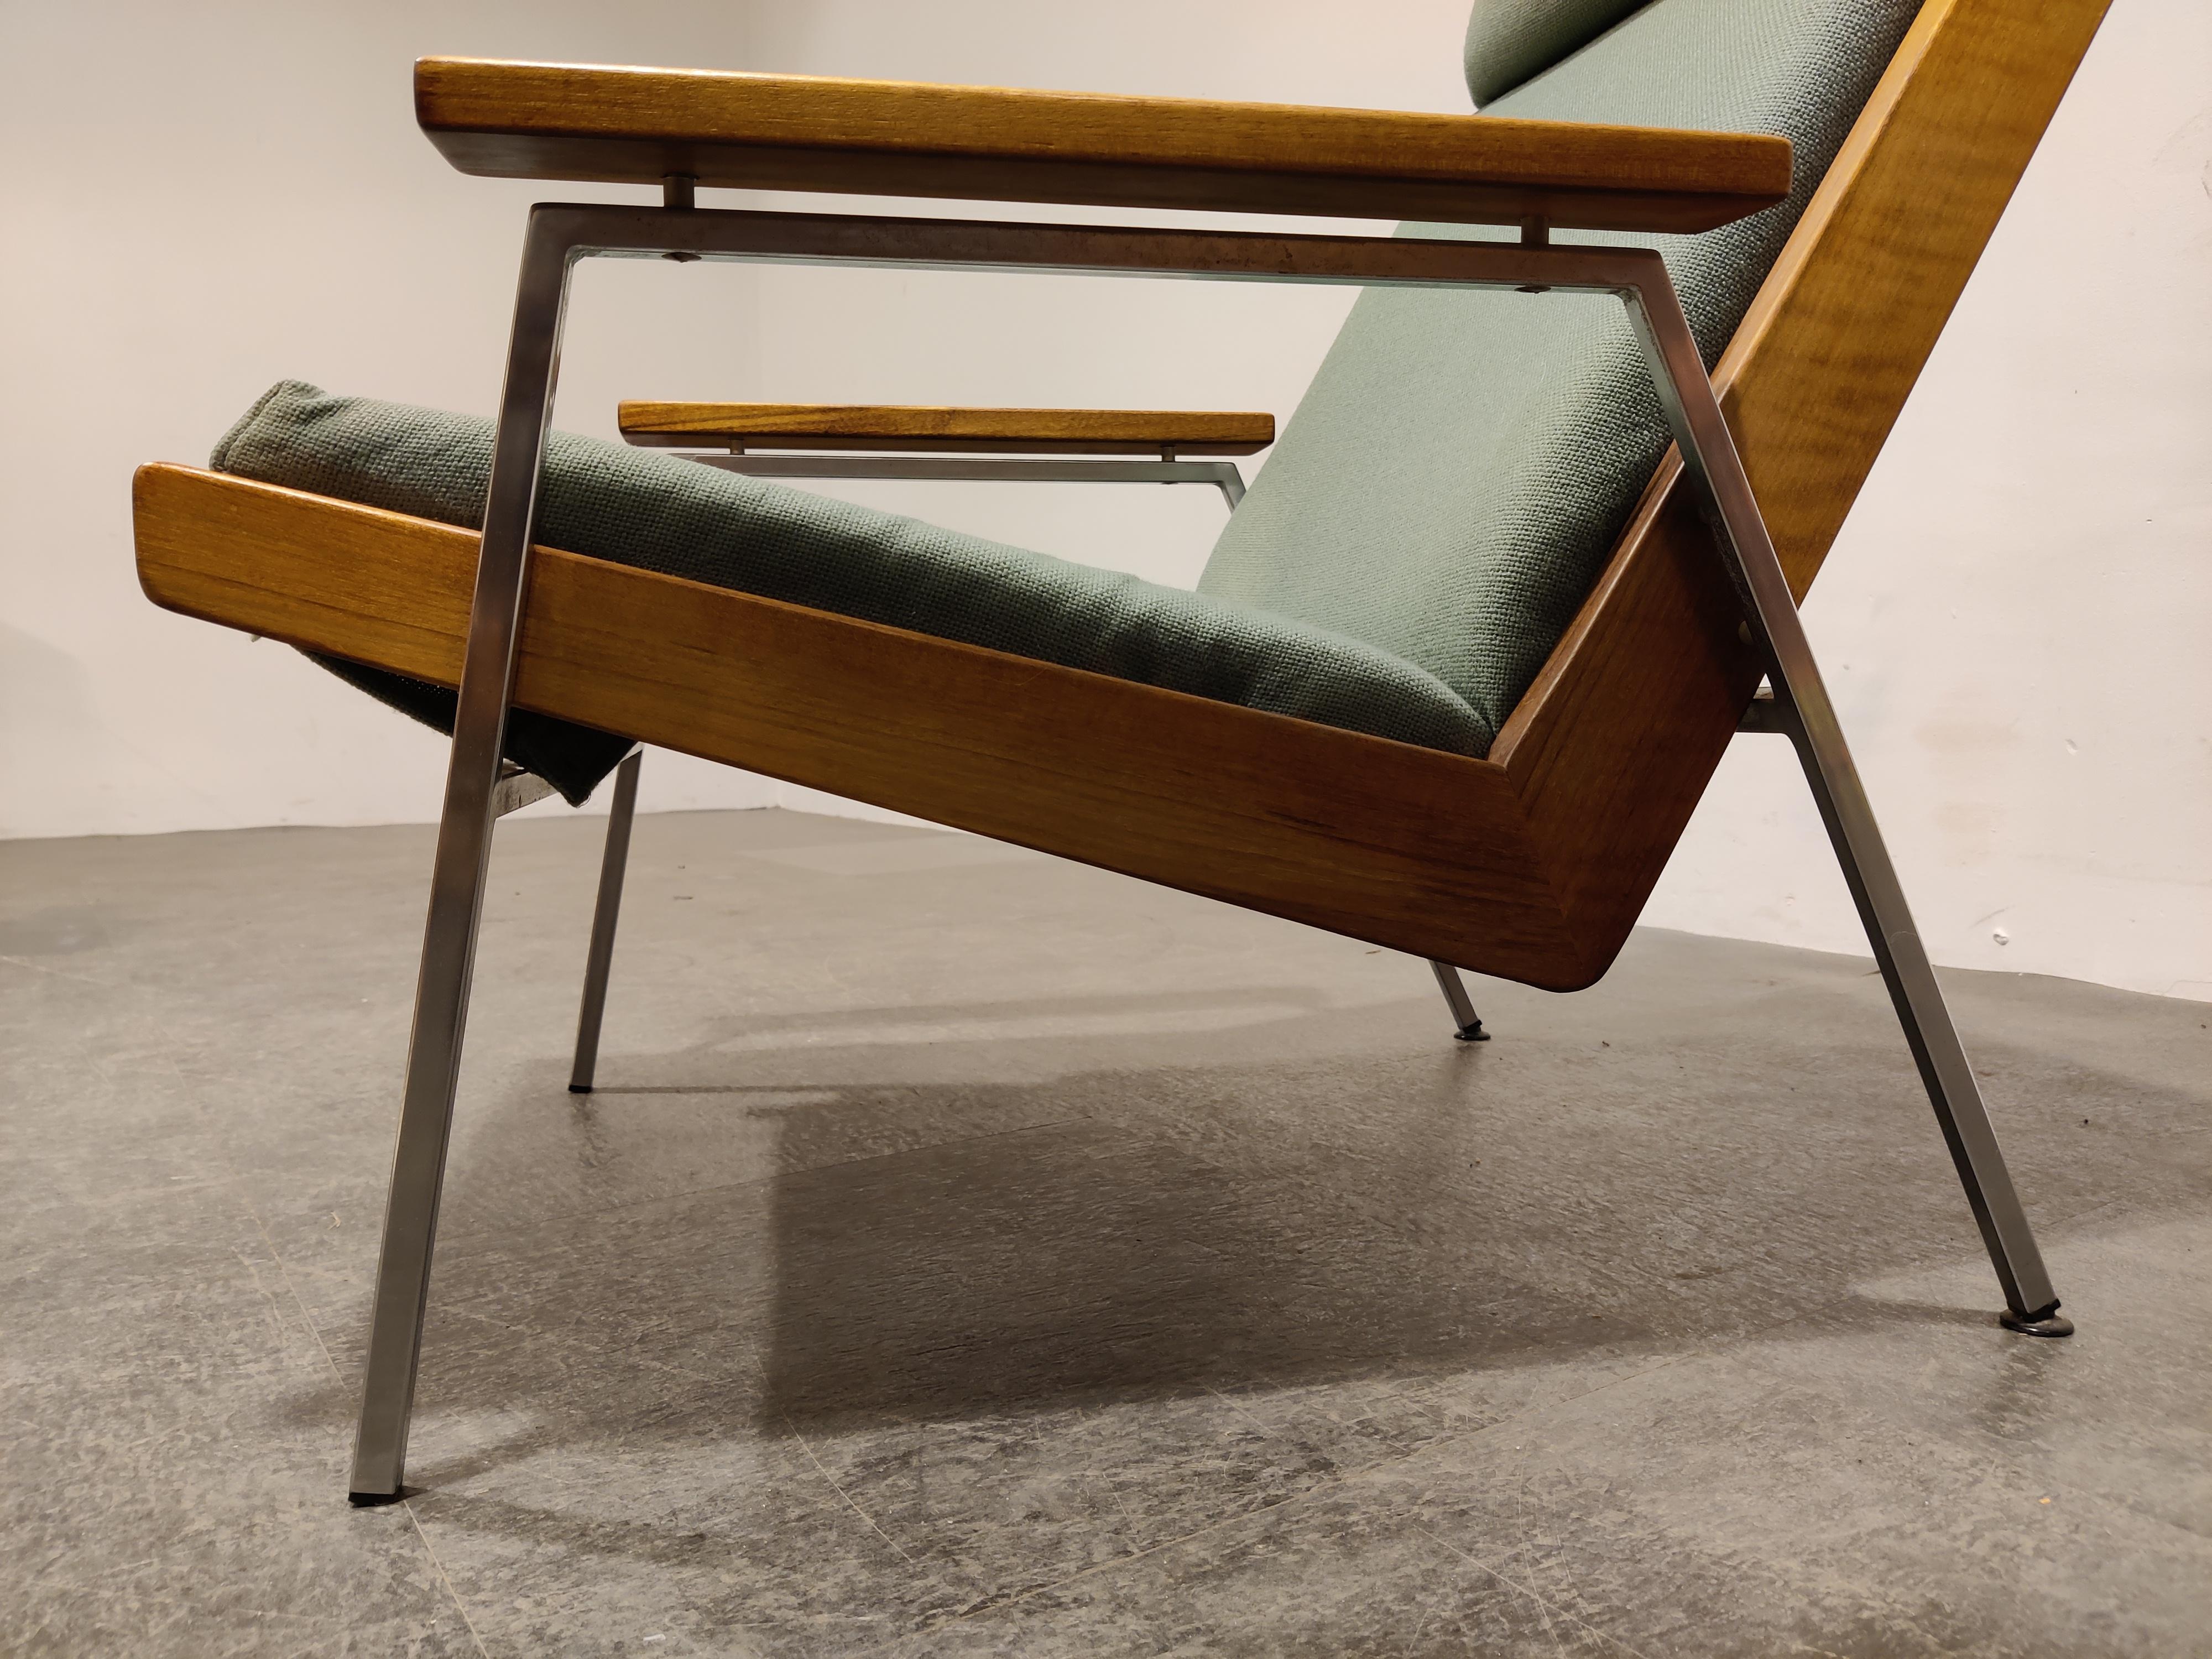 Original mid century Lotus armchair designed by Rob Parry for de Ster Gelderland.

Steel frame with oak and upholstered in the original olive green fabric.

Good original condition with normal age related wear.

The fabric is still good to be